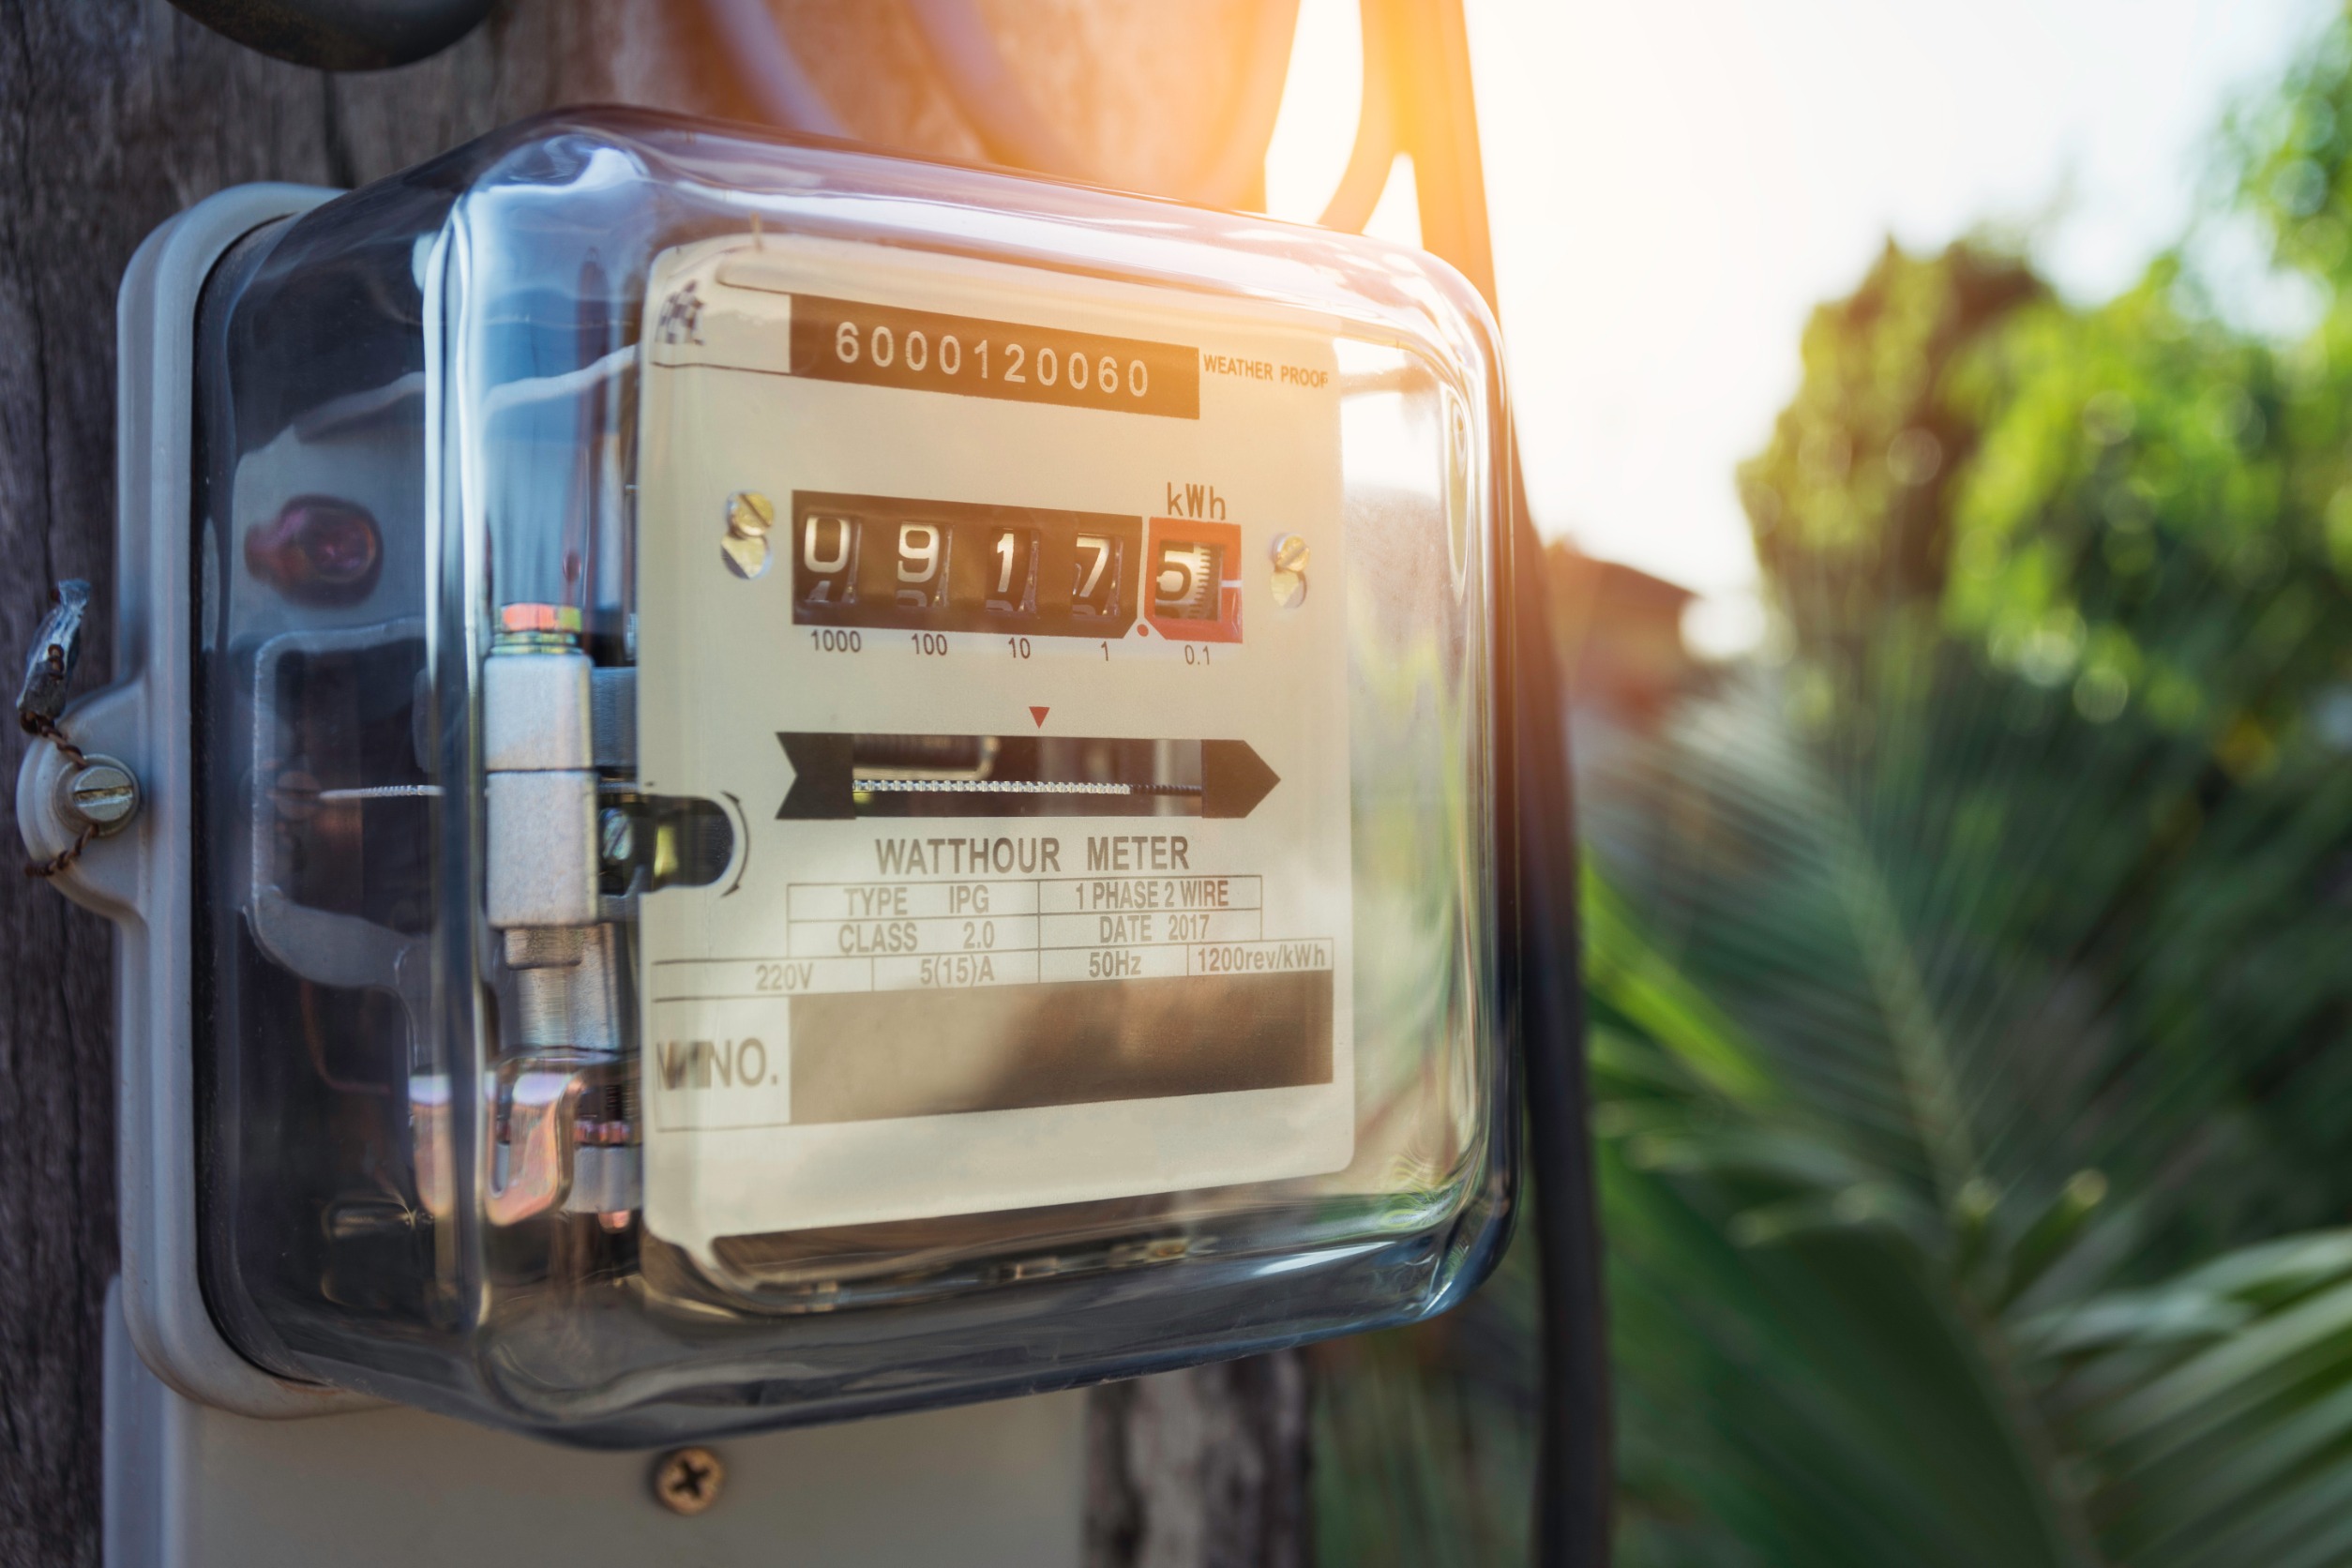 Who Is Responsible For Electric Meter Repairs?